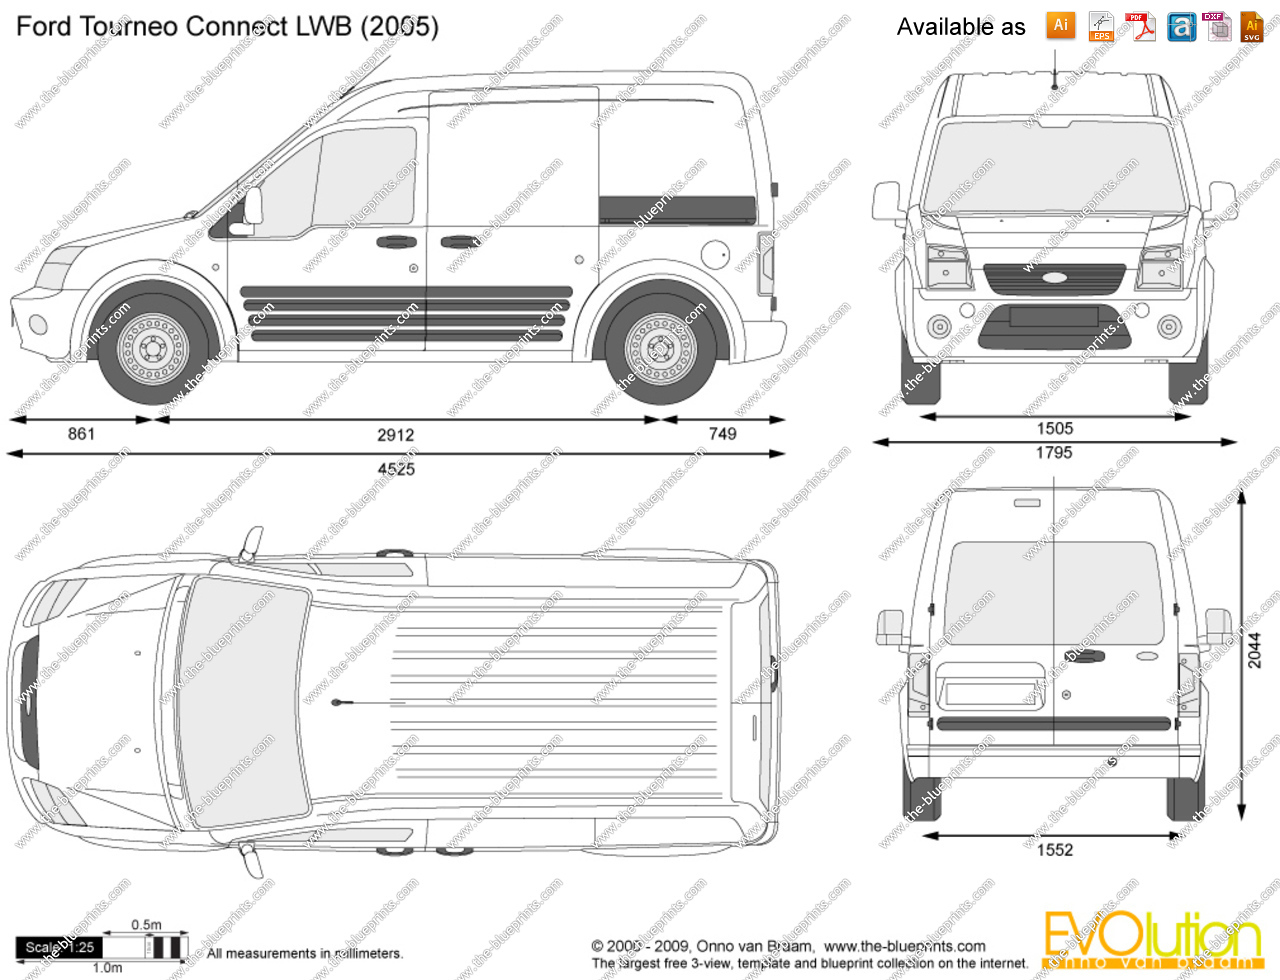 Размер форд коннект. Ford Transit connect 2008 габариты. Ford Tourneo connect 2008 габариты. Ford Transit connect, 2008 Размеры. Ford Tourneo 2008 чертеж.